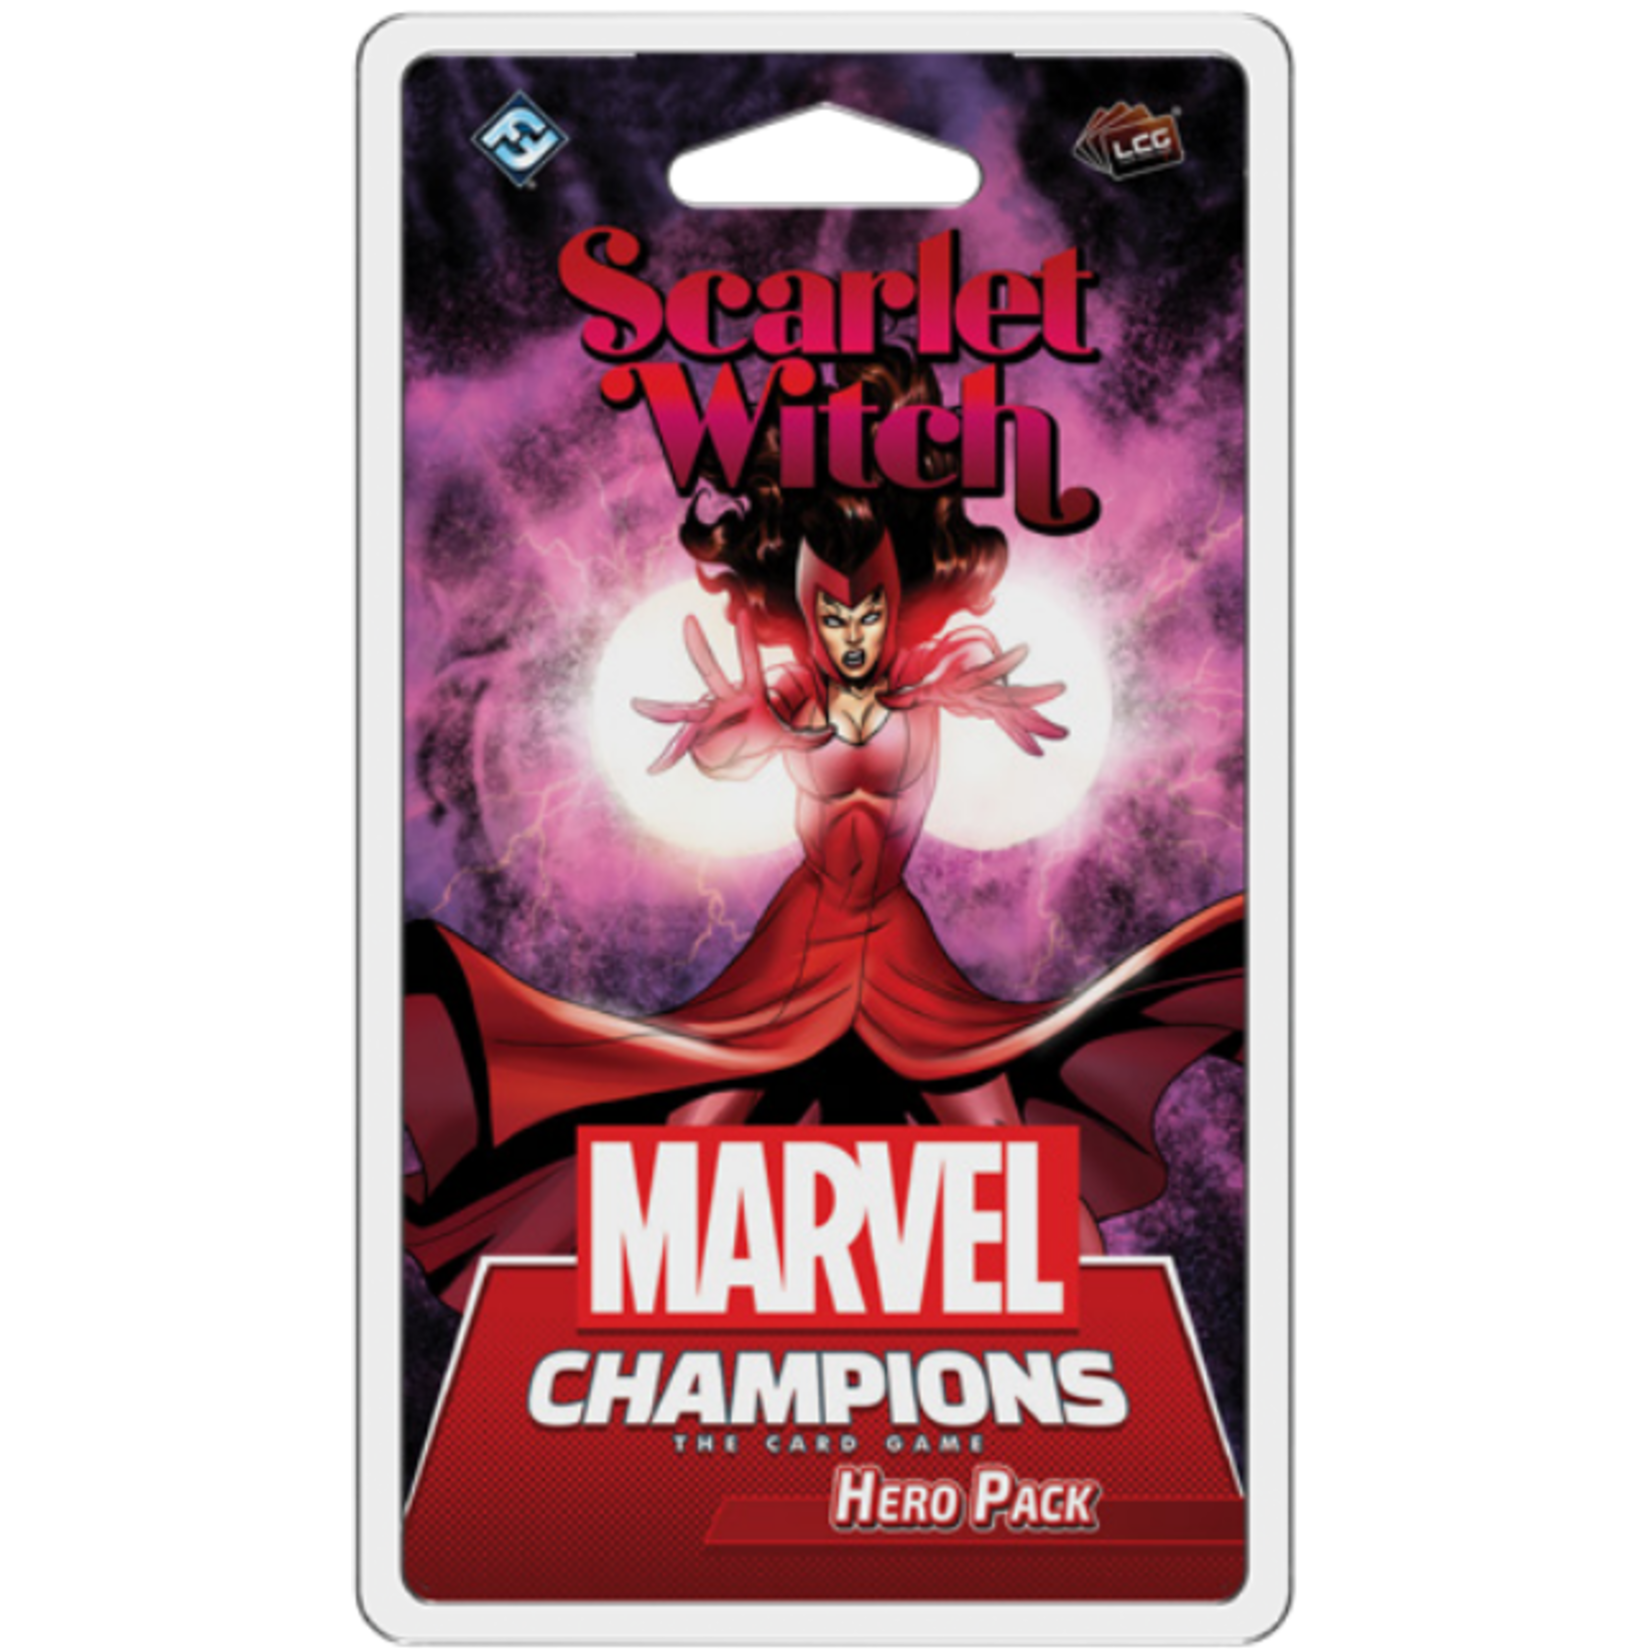 Fantasy Flight Games Marvel Champions Living Card Game: Scarlet Witch Hero Pack